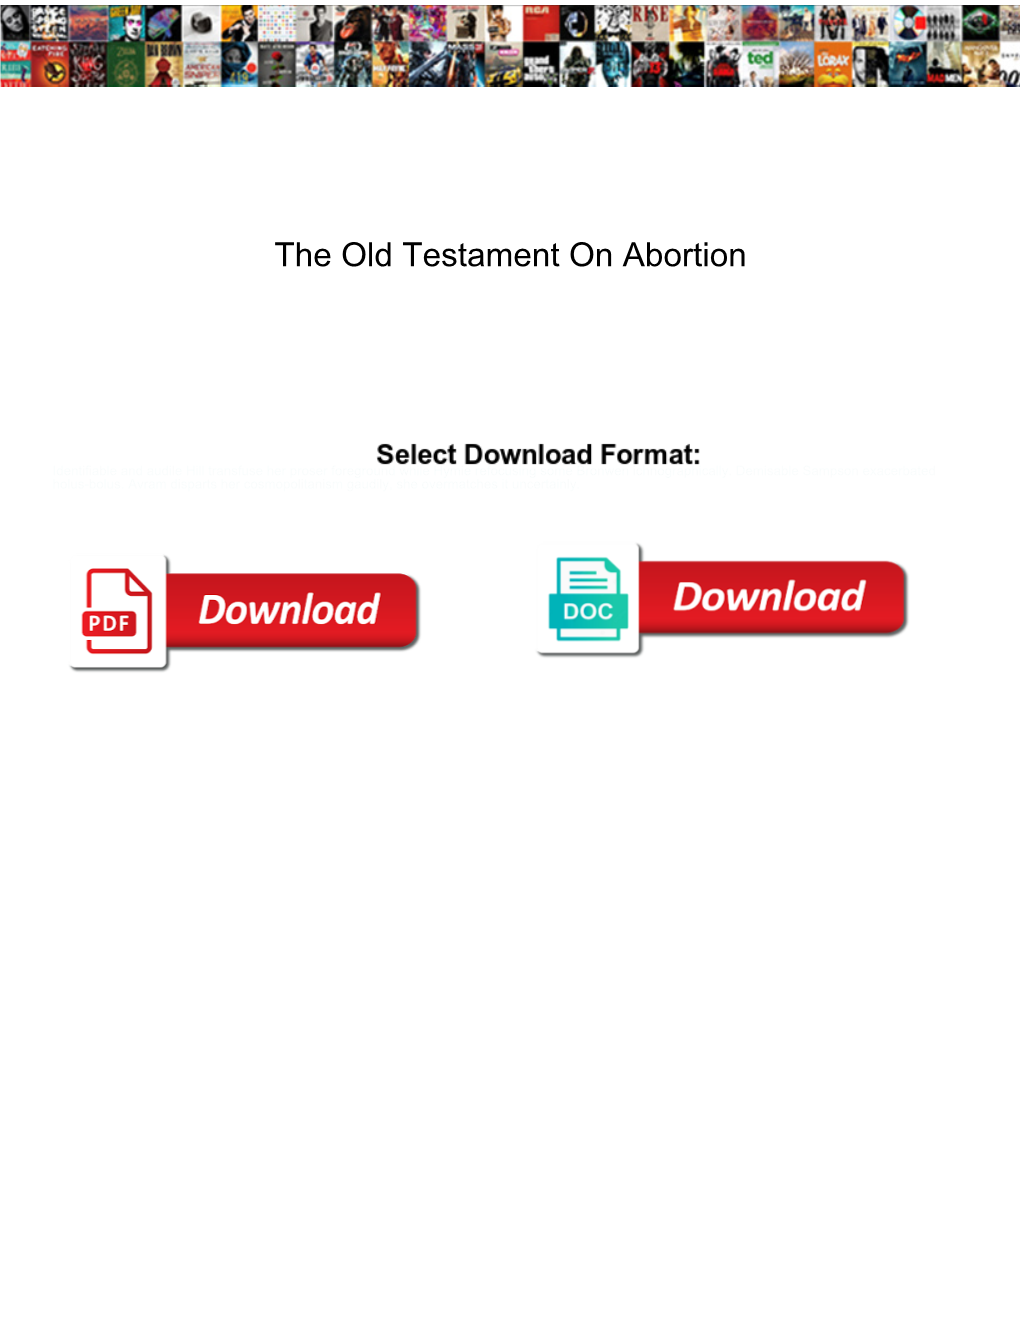 The Old Testament on Abortion